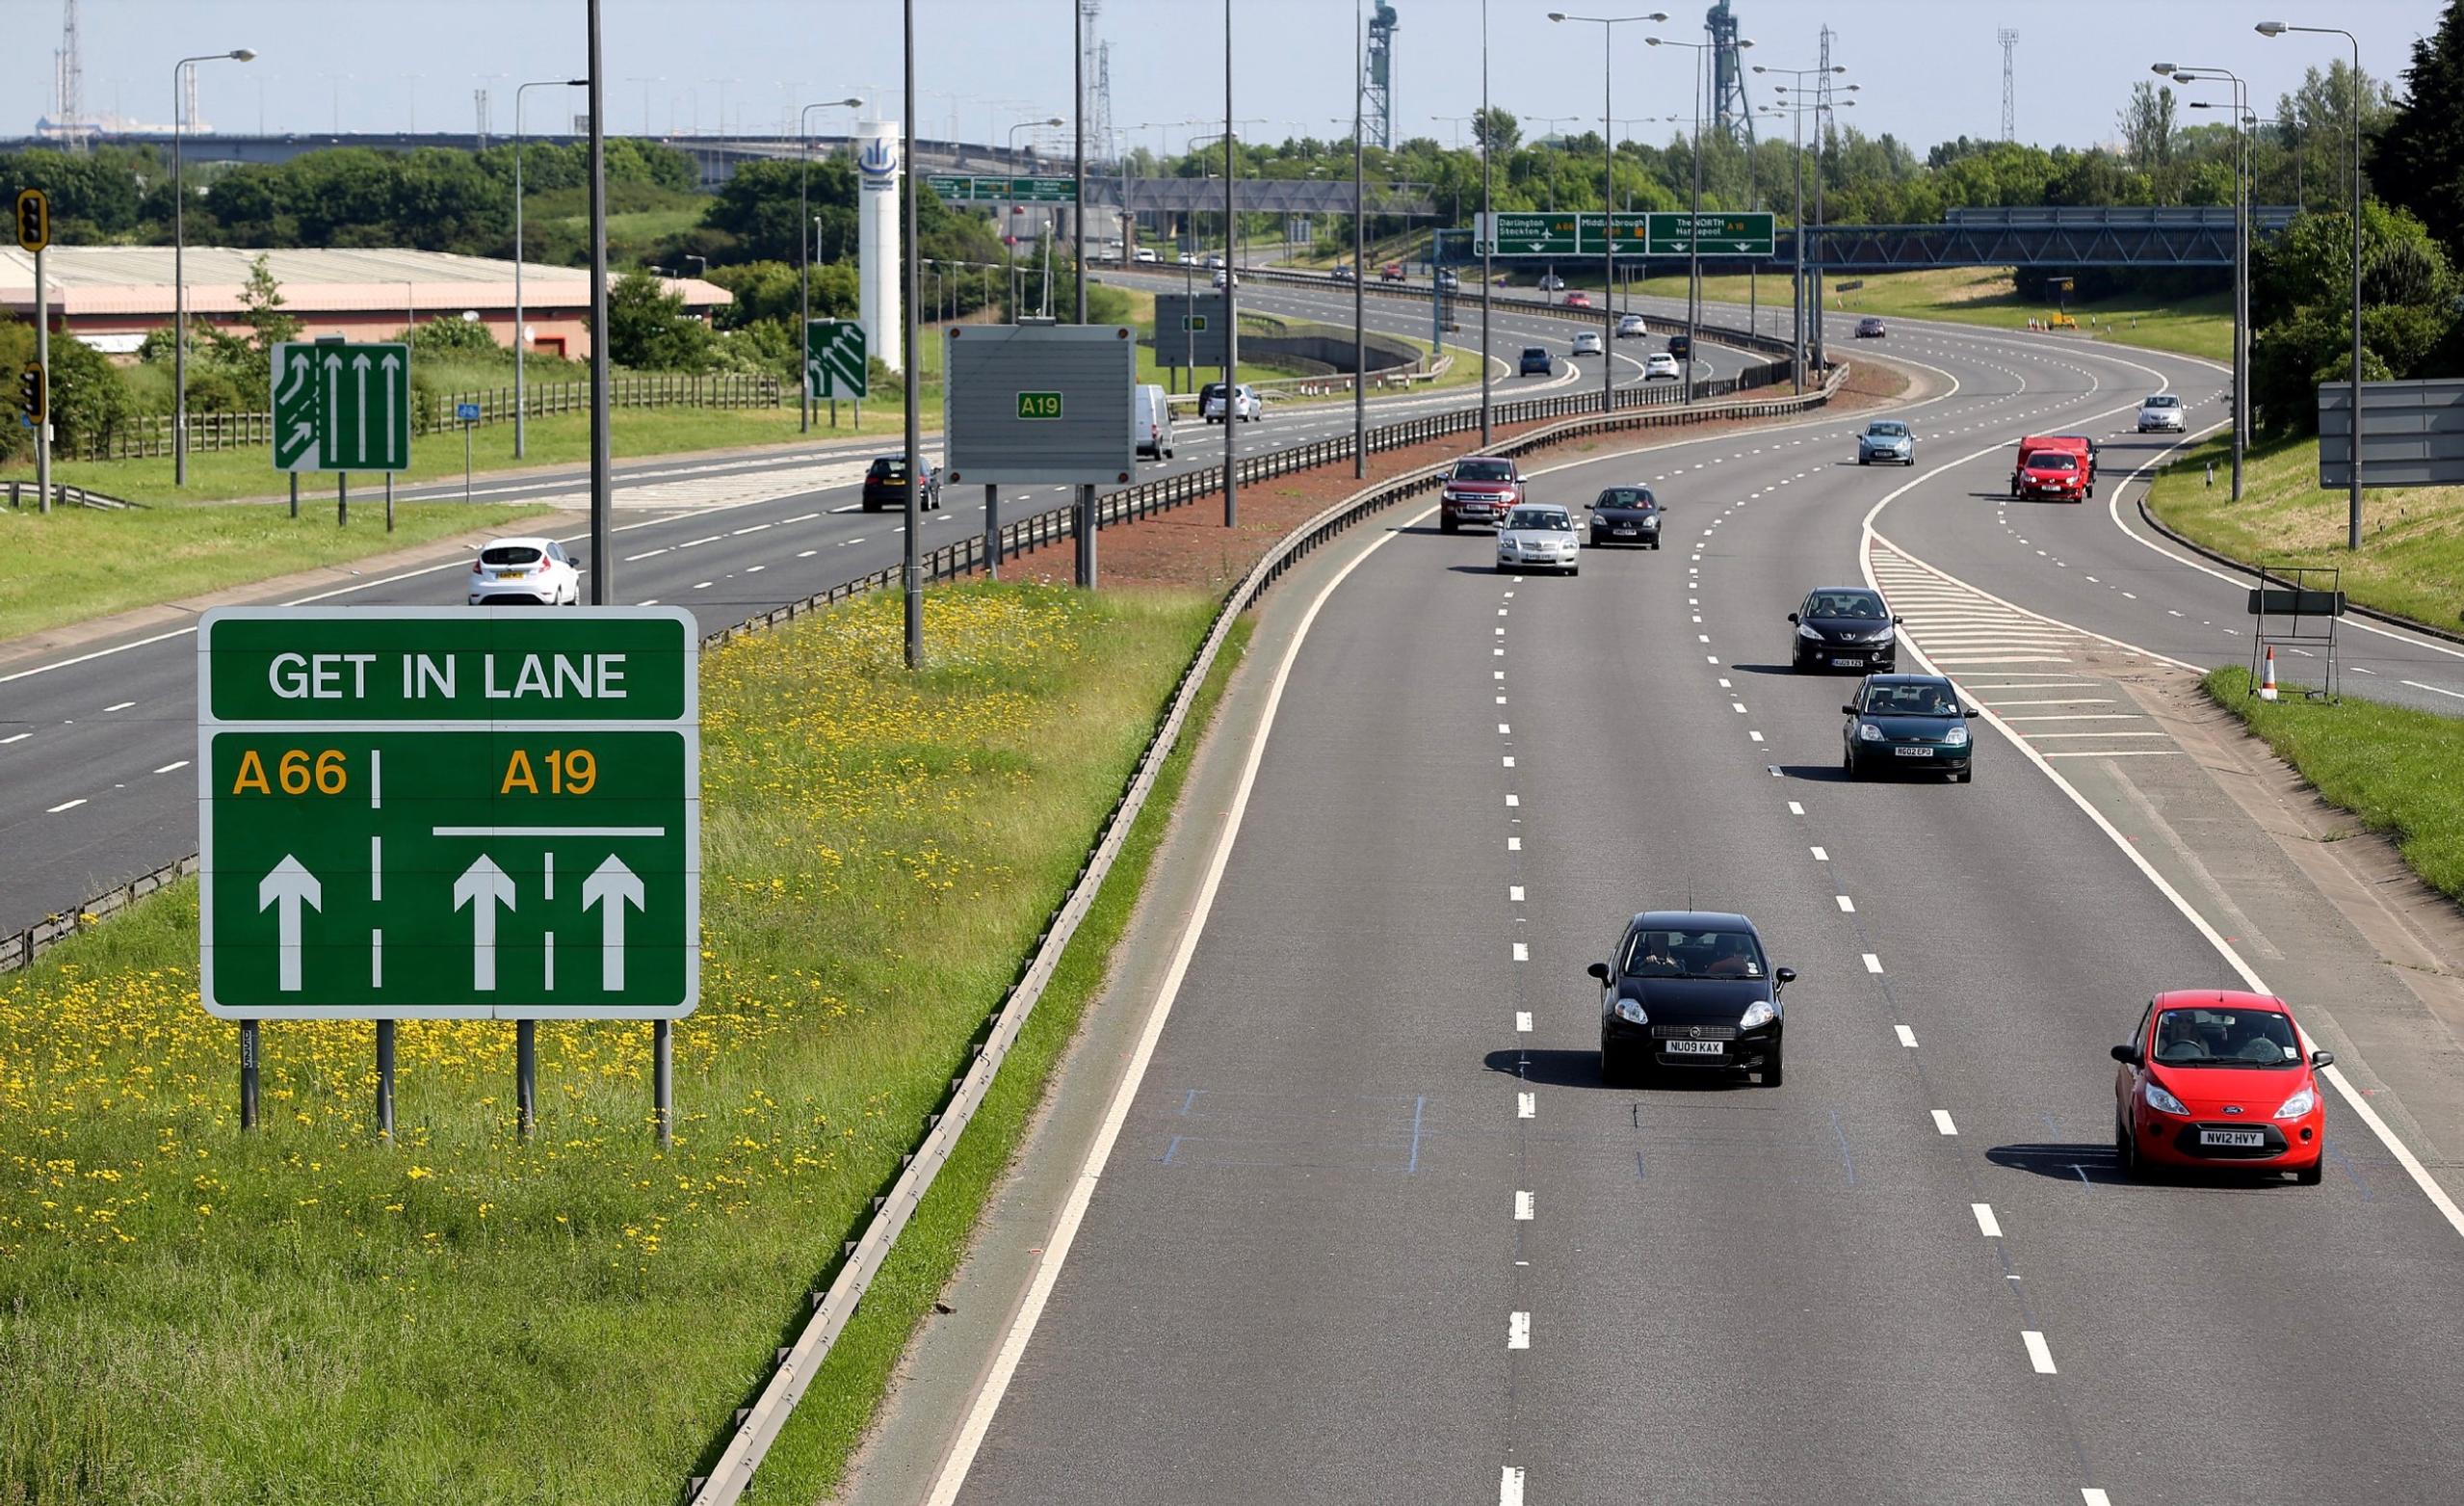 Funding will go towards improving the A19 junction and work on the proposed A19  Tees Crossing